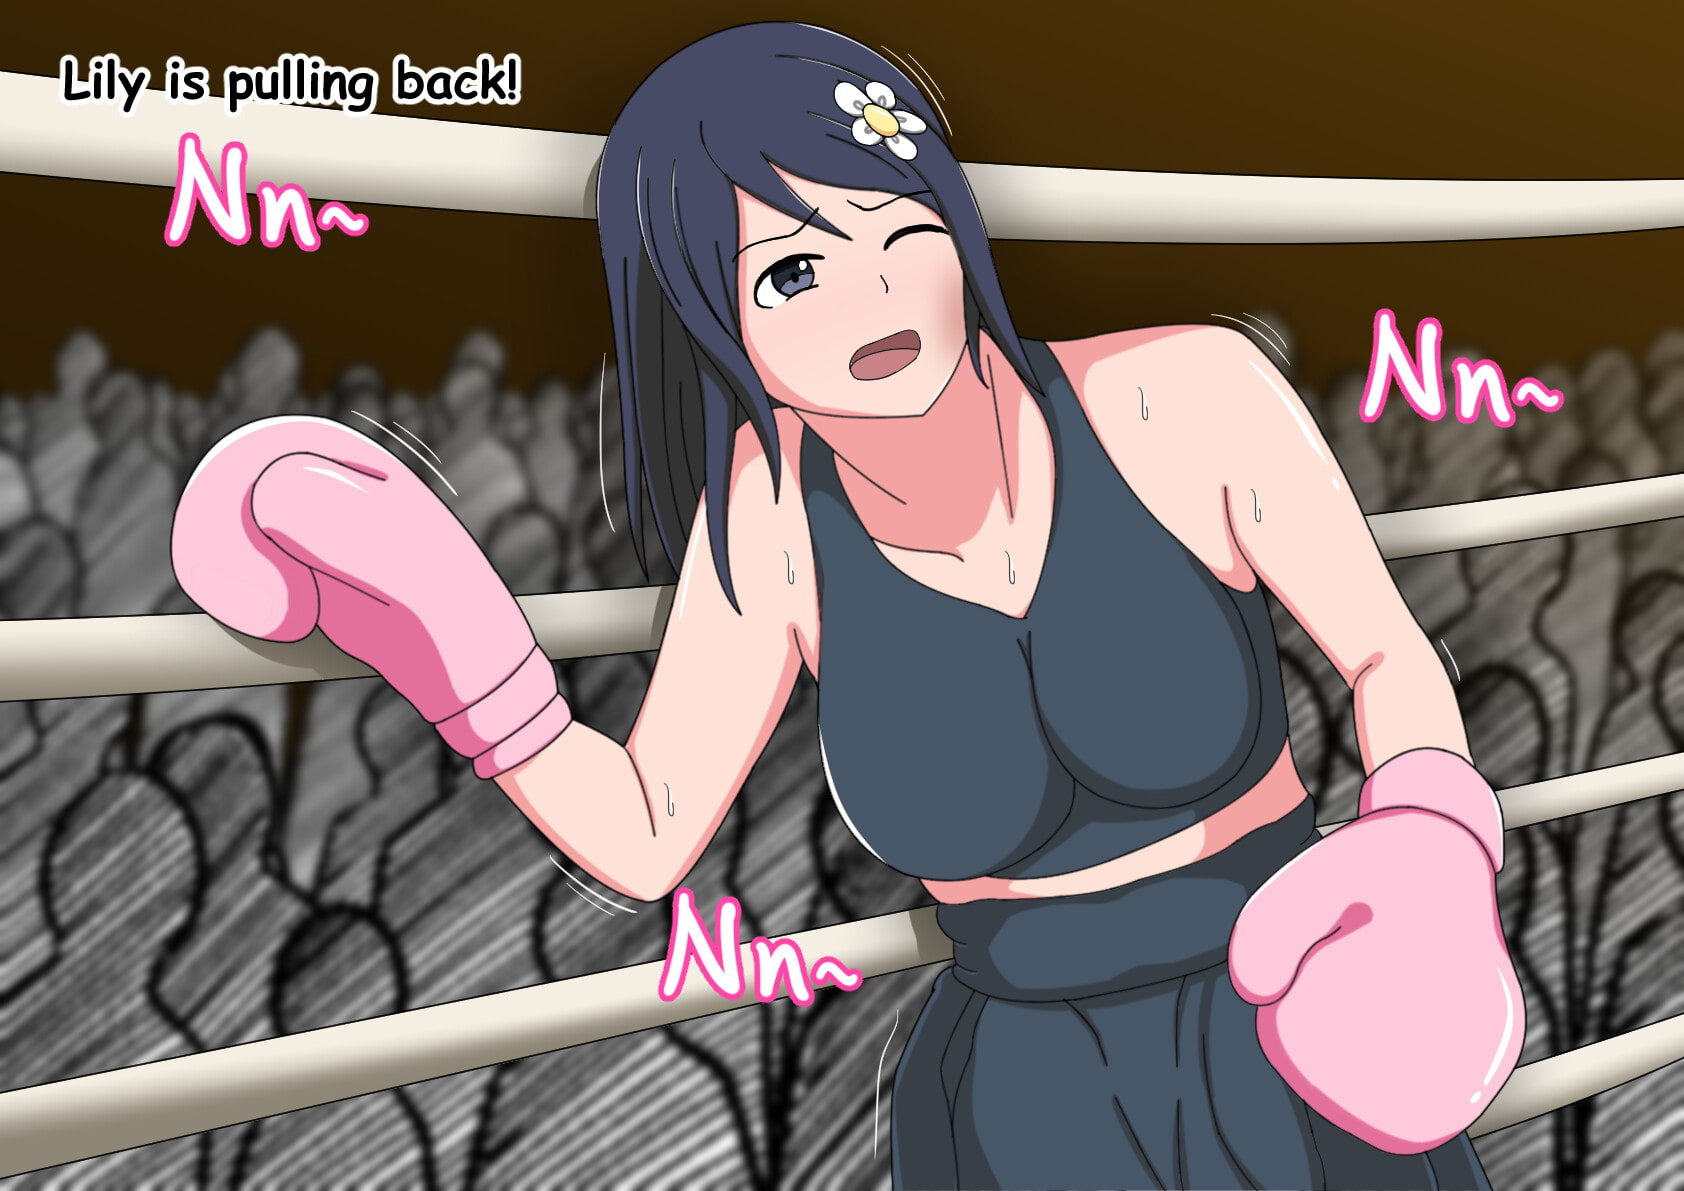 Ultimate Boxing - Lily's defeated (English)